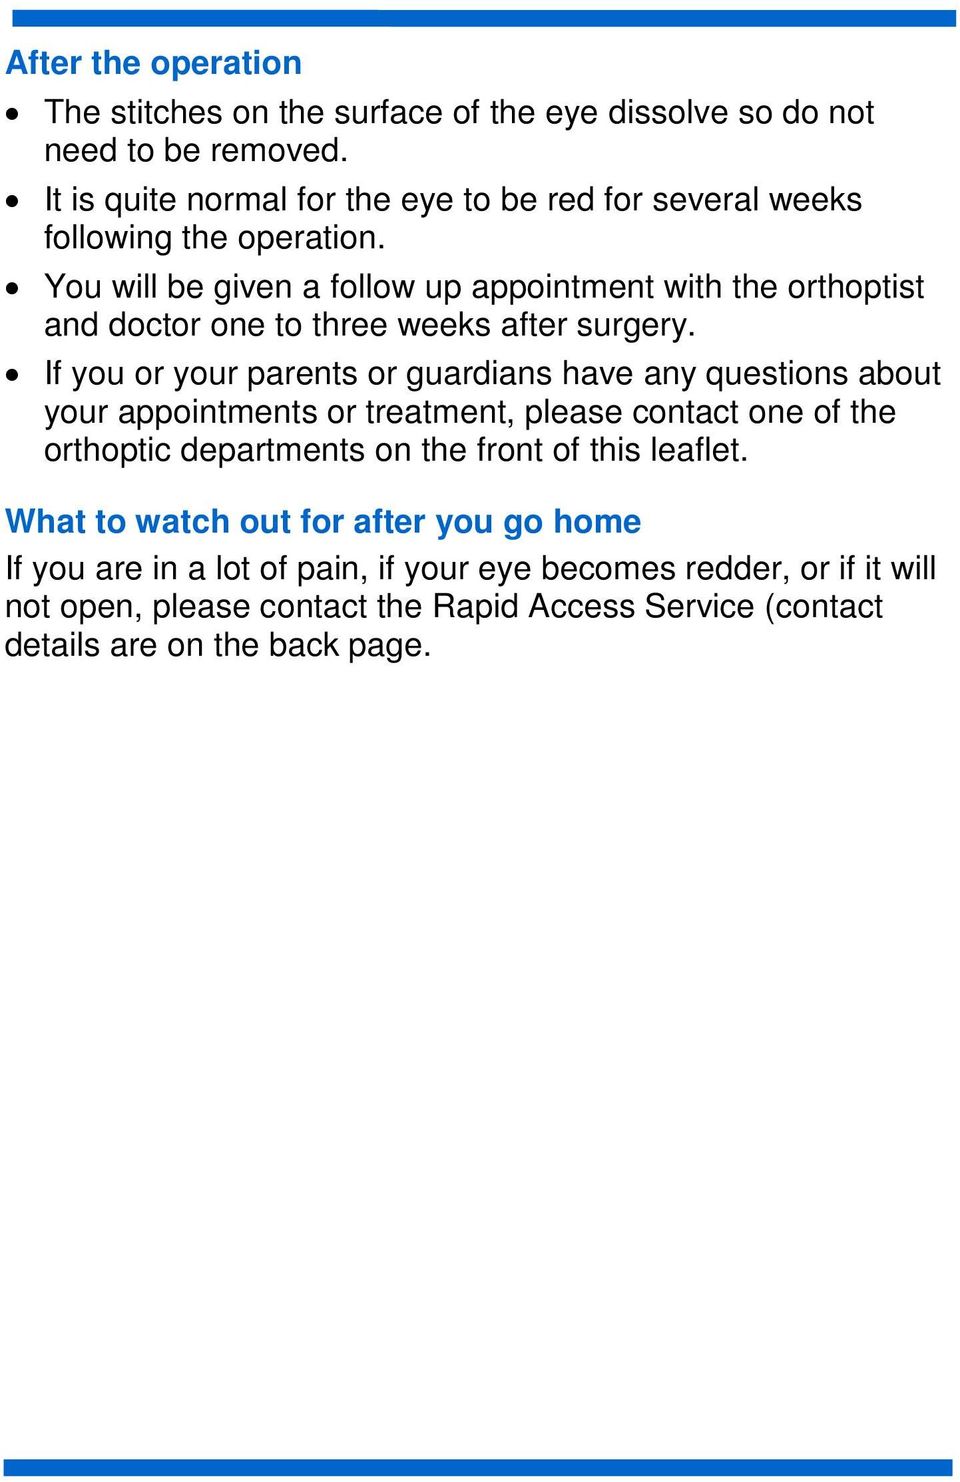 You will be given a follow up appointment with the orthoptist and doctor one to three weeks after surgery.